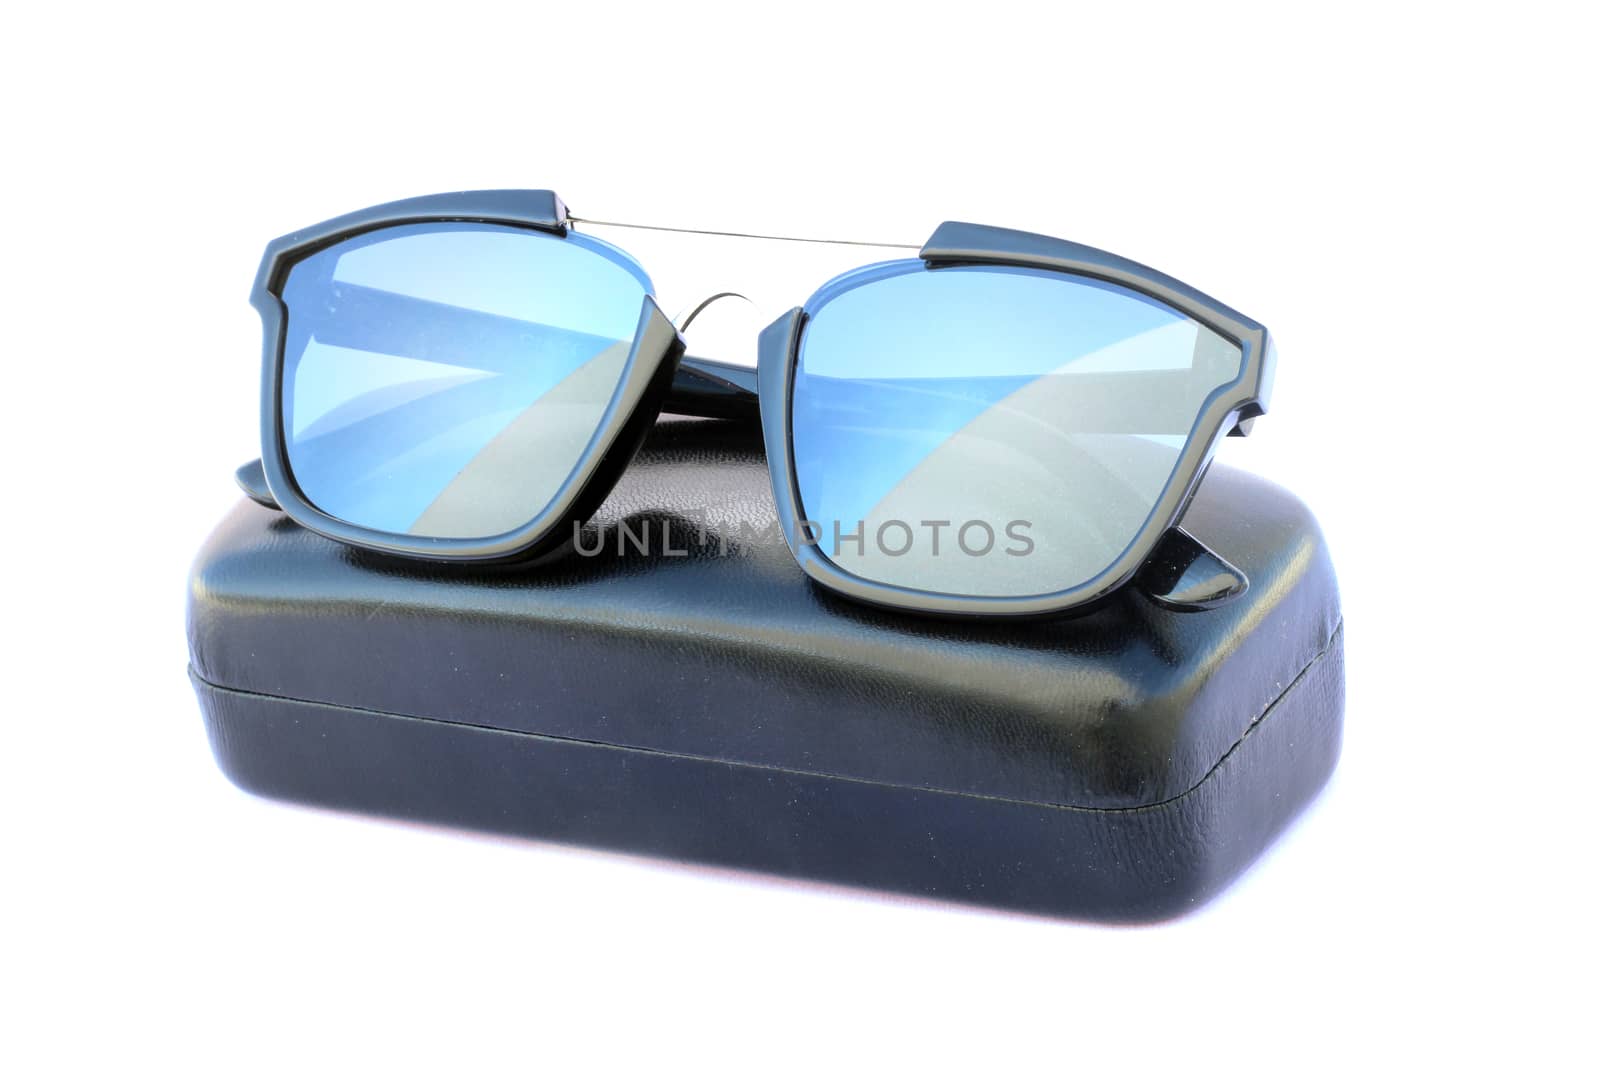 Image of sunglasses and black box on a white background